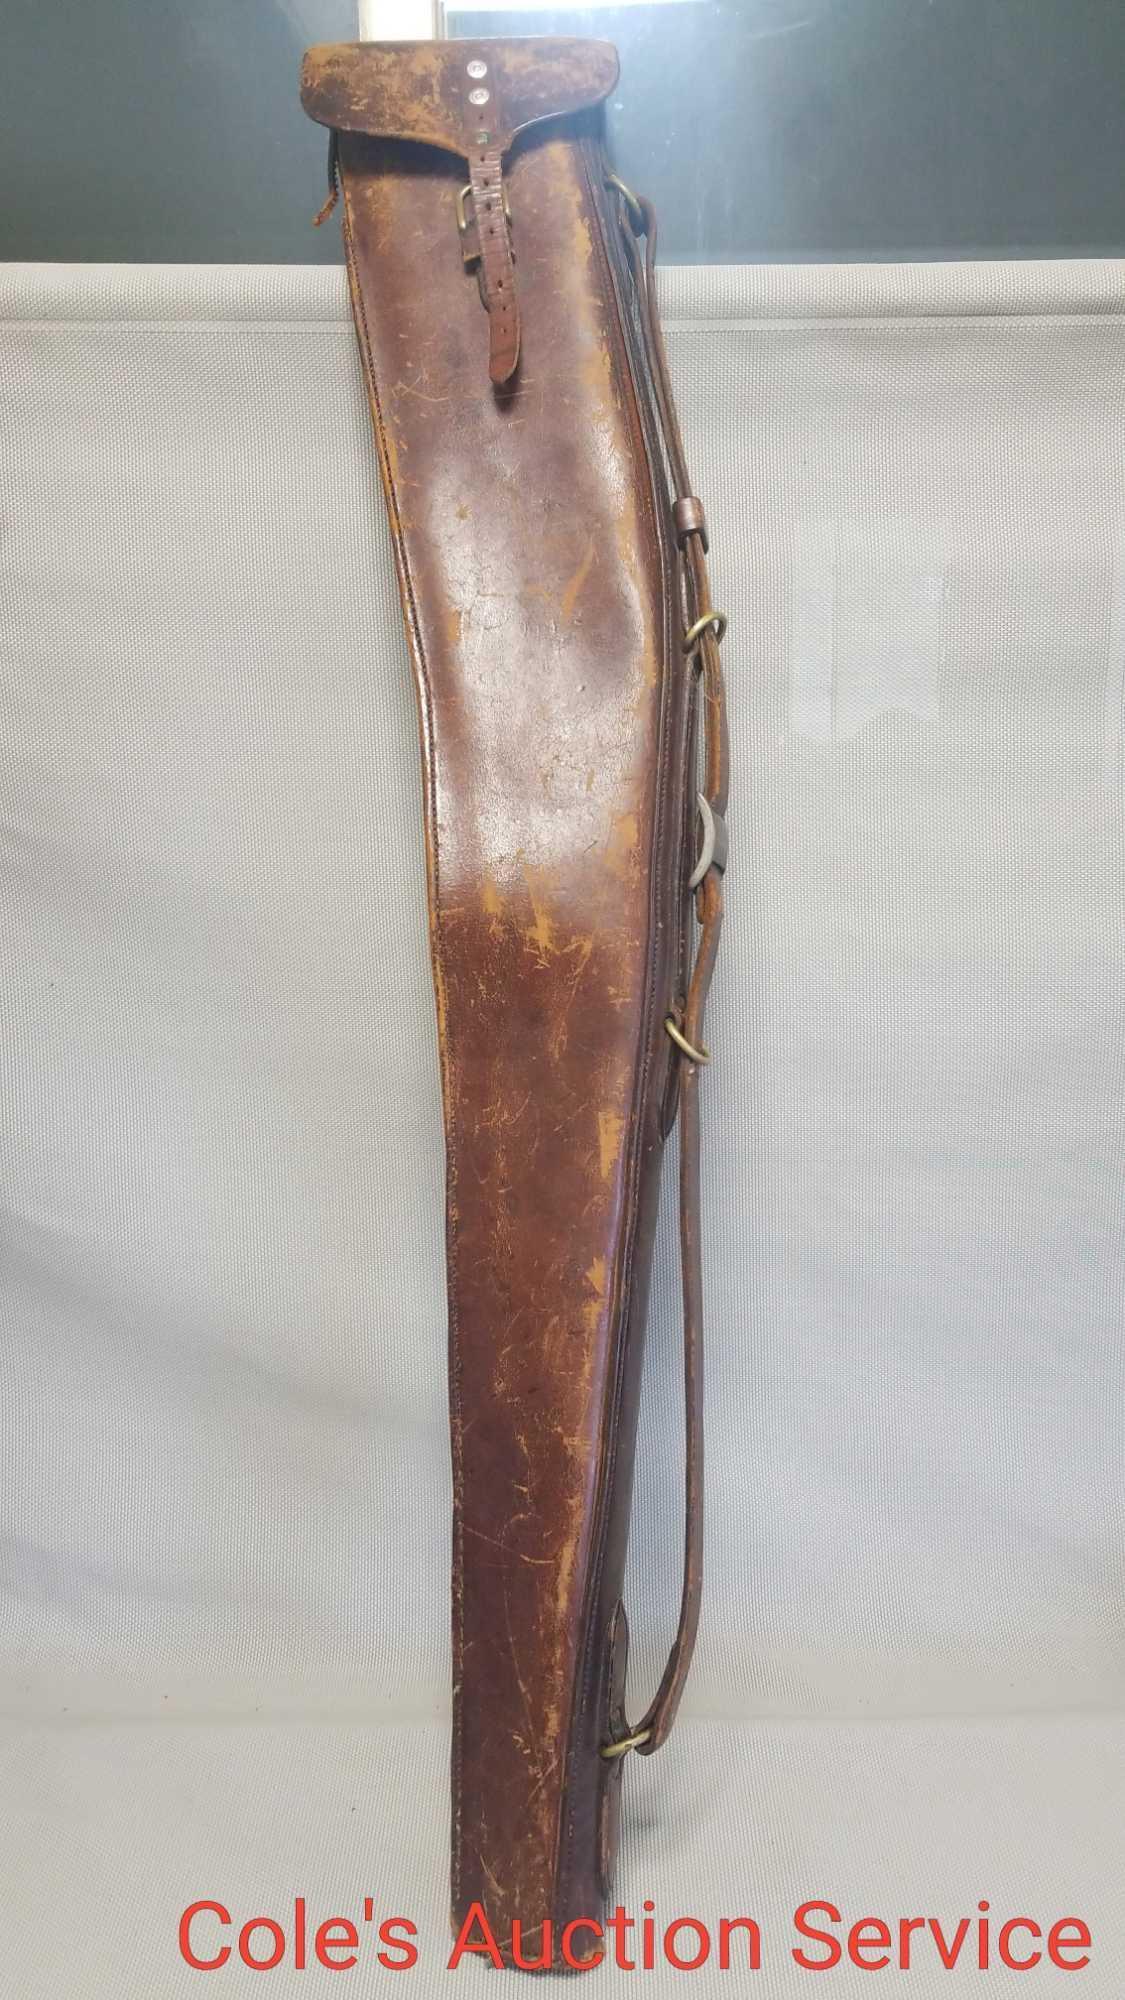 Antique rifle scabbard made of leather. Marked Heiser Denver 839. Seller says civil war but I'm not